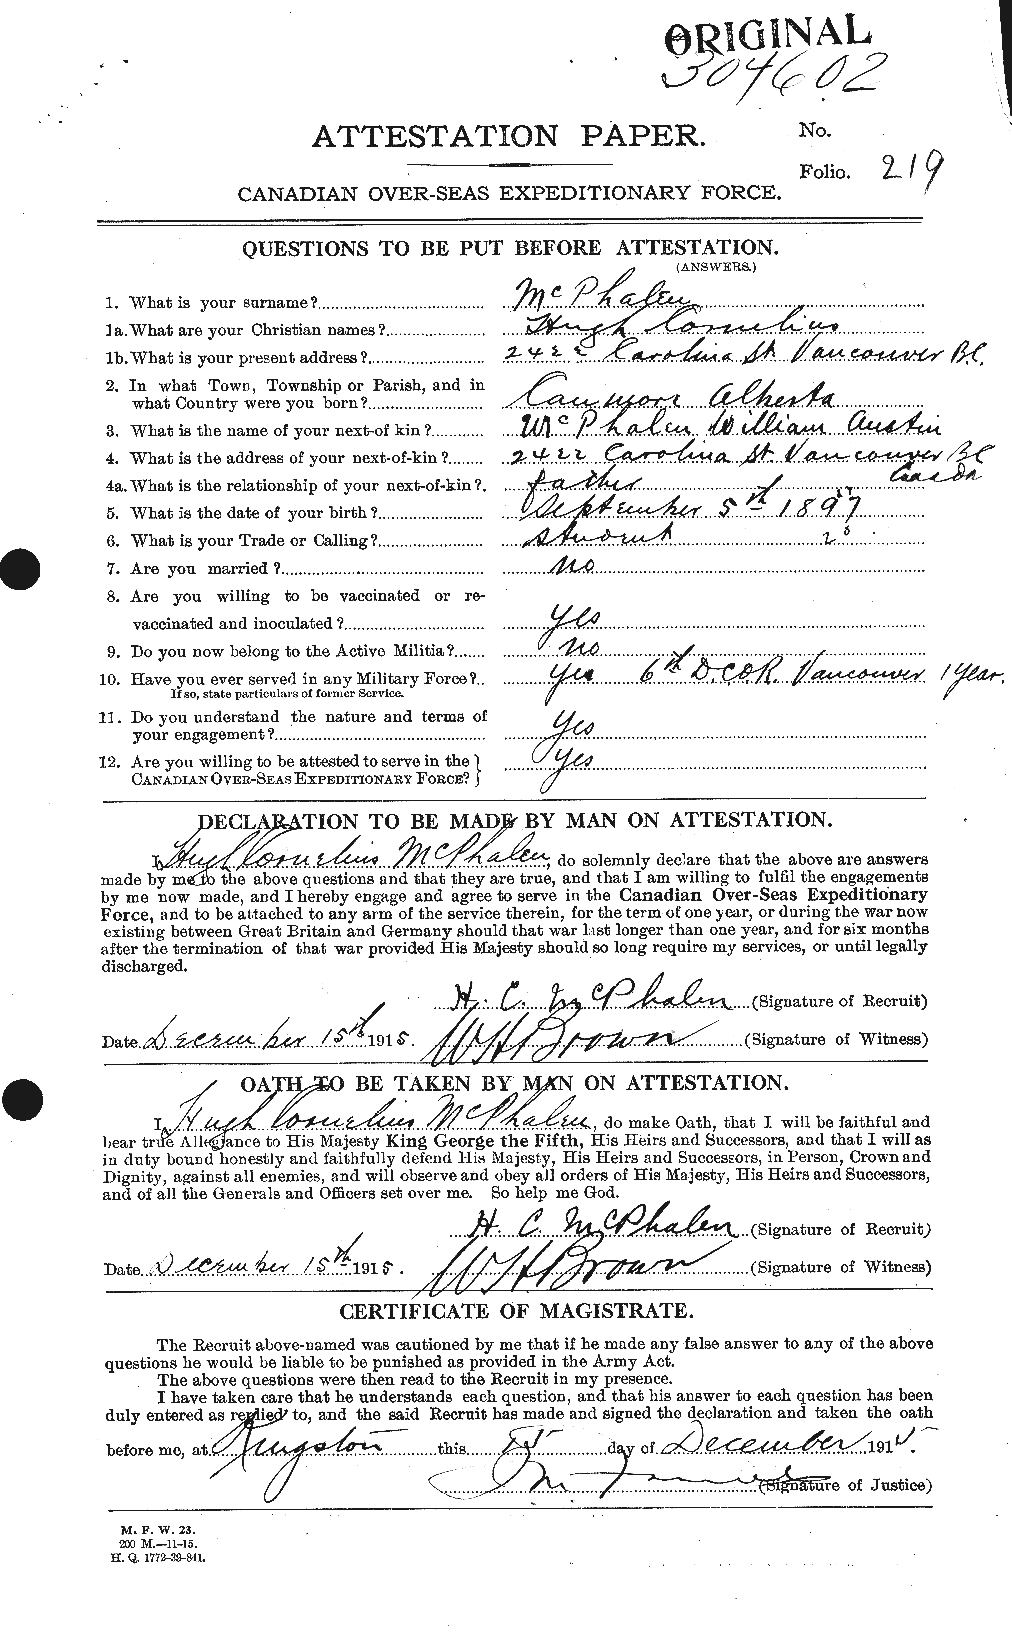 Personnel Records of the First World War - CEF 540938a